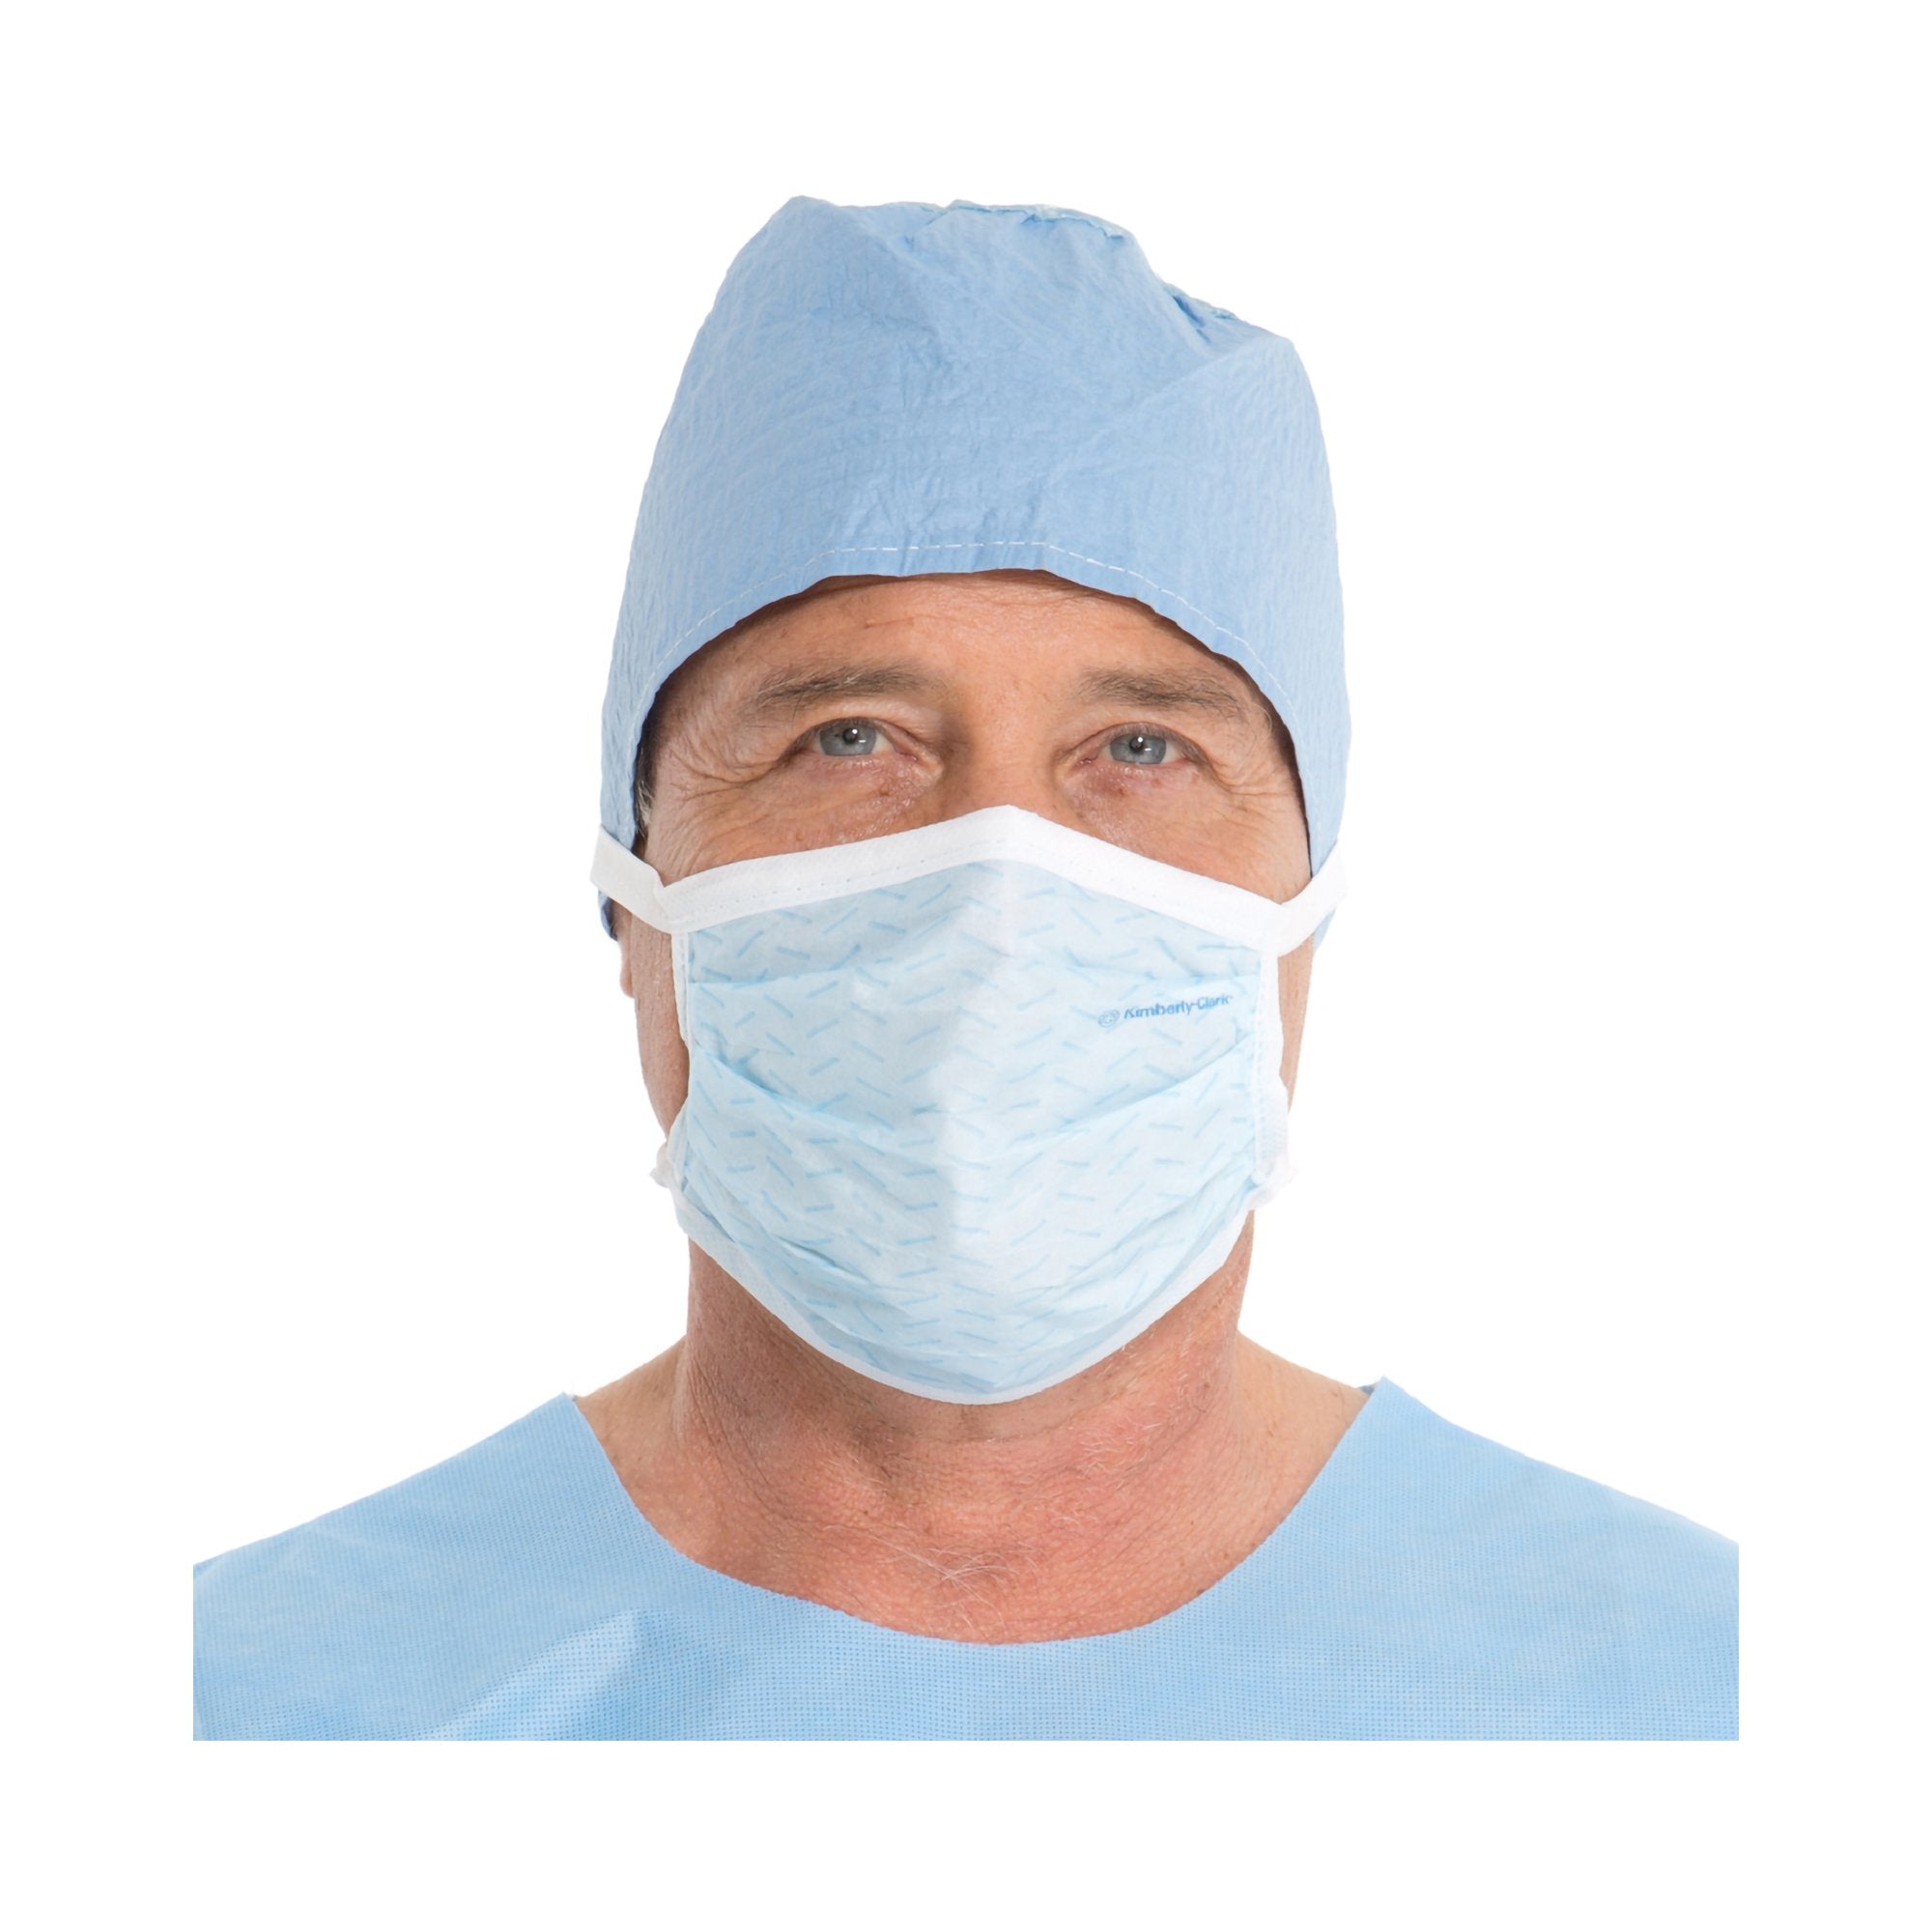 Surgical Mask Soft Touch II Pleated Tie Closure One Size Fits Most Blue NonSterile Not Rated Adult